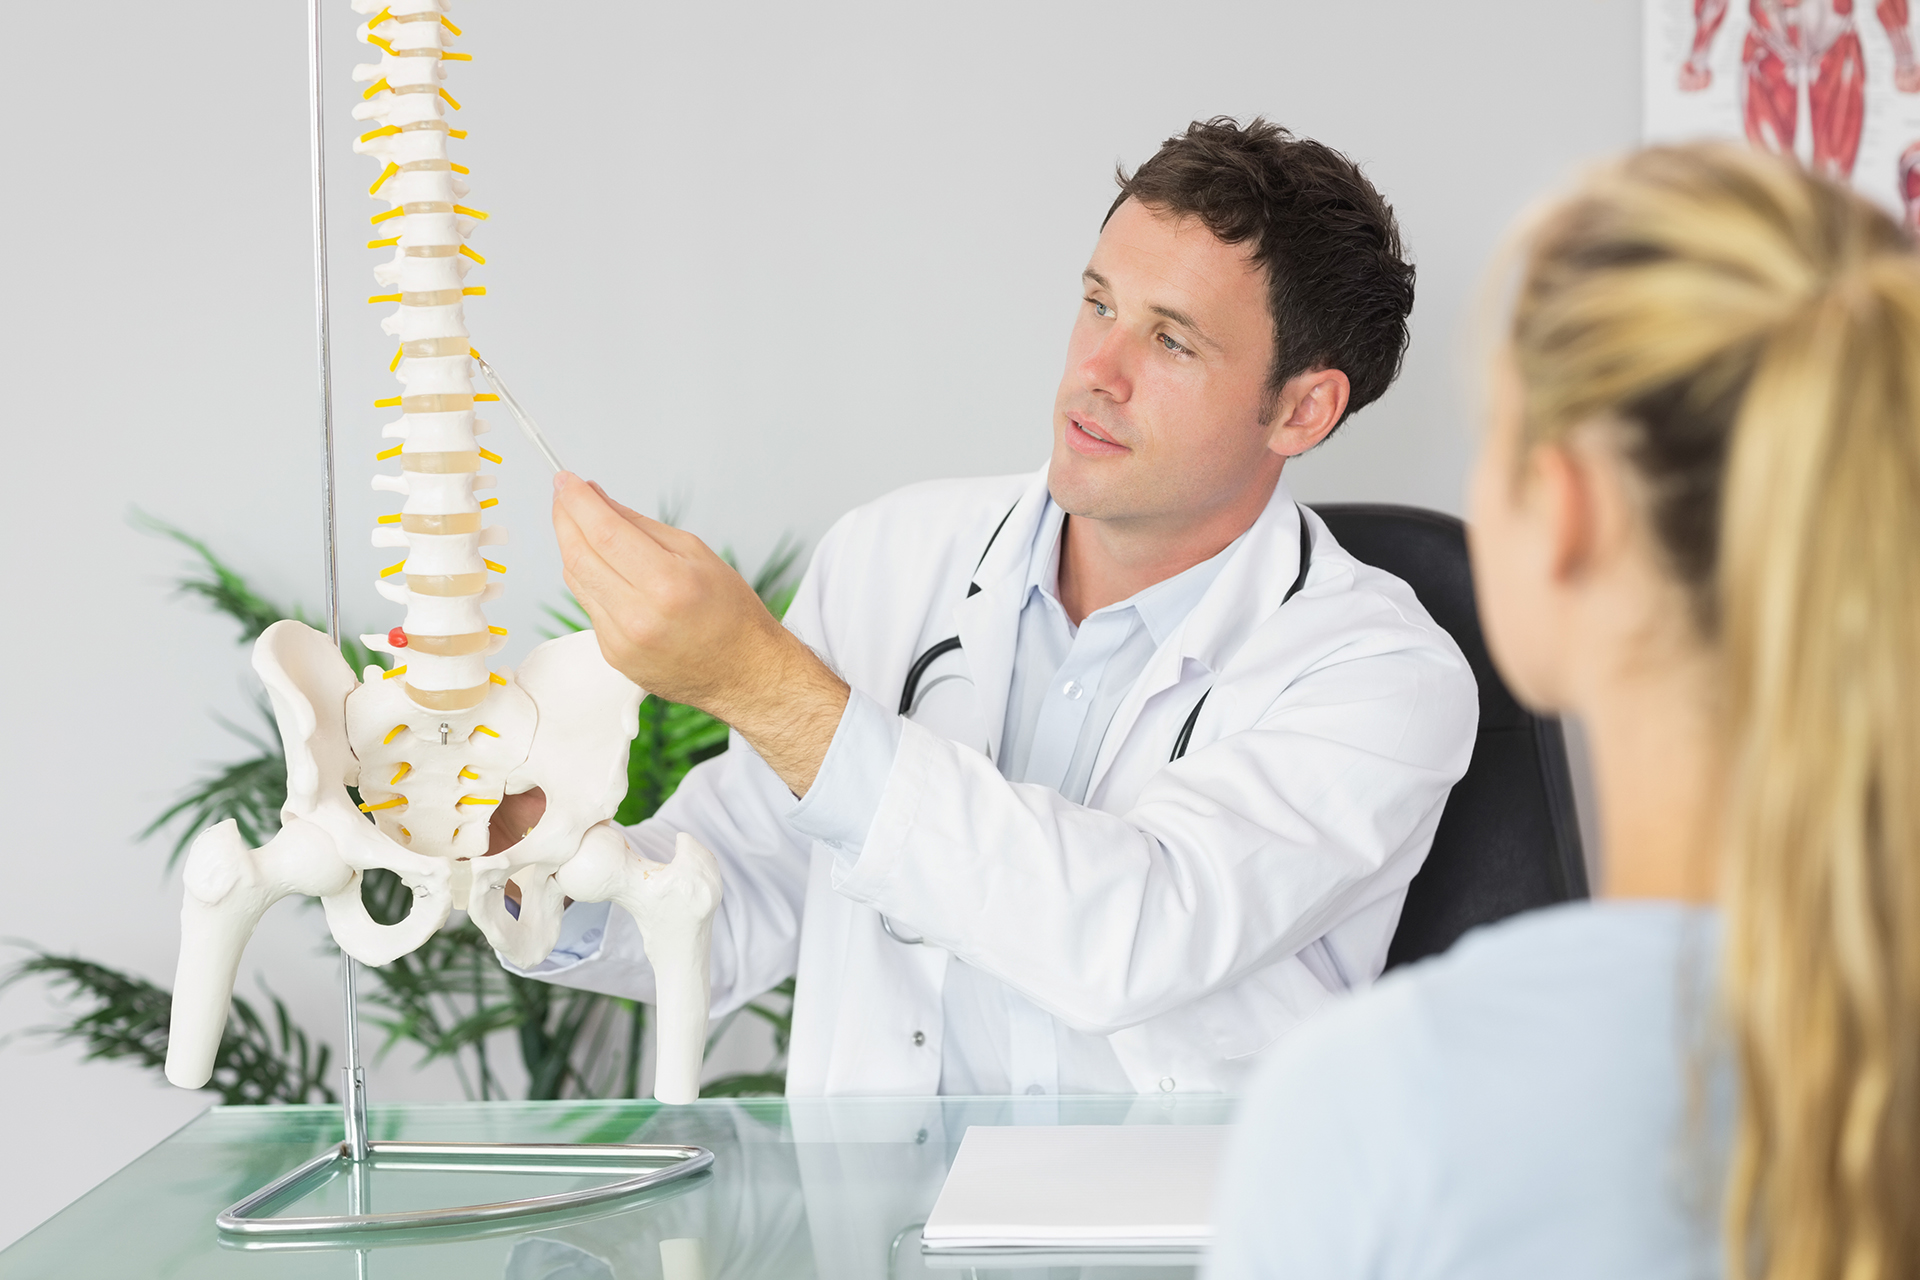 Chiropractor demonstrates an adjustment to a patient using a model spine